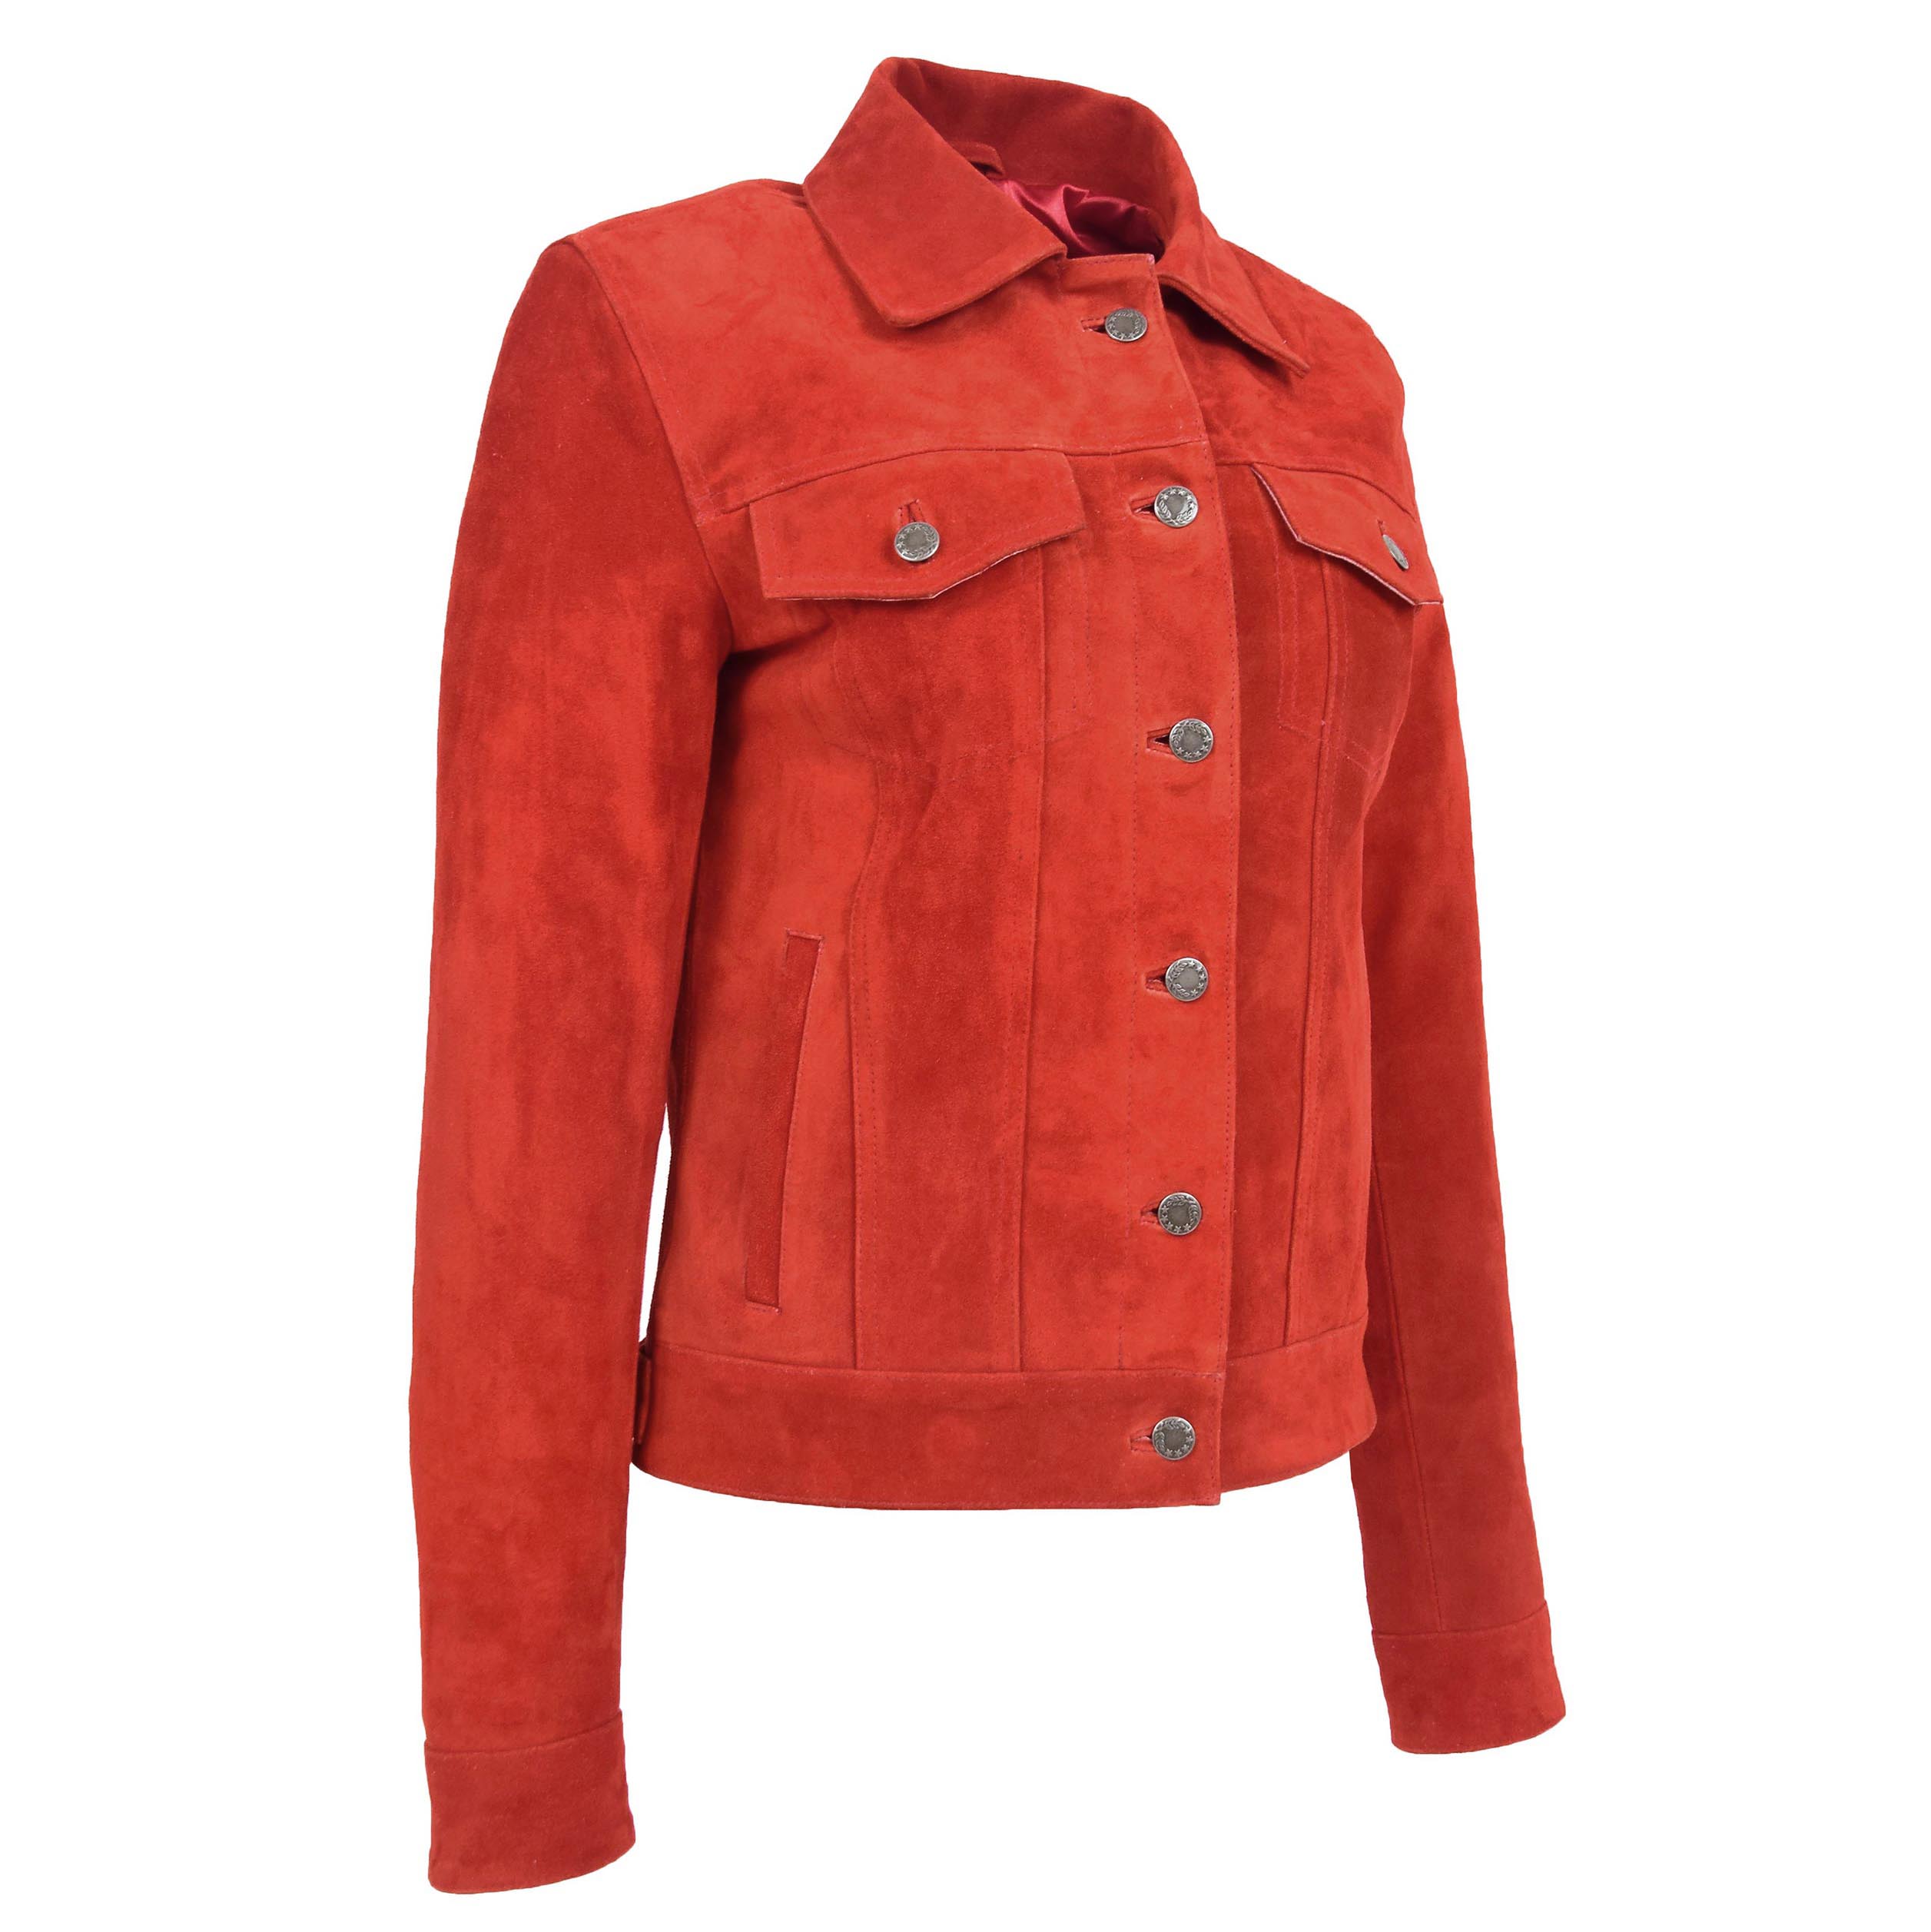 Womens Soft Suede Trucker Style Jacket Alma Red - Bikers Leather Jacket